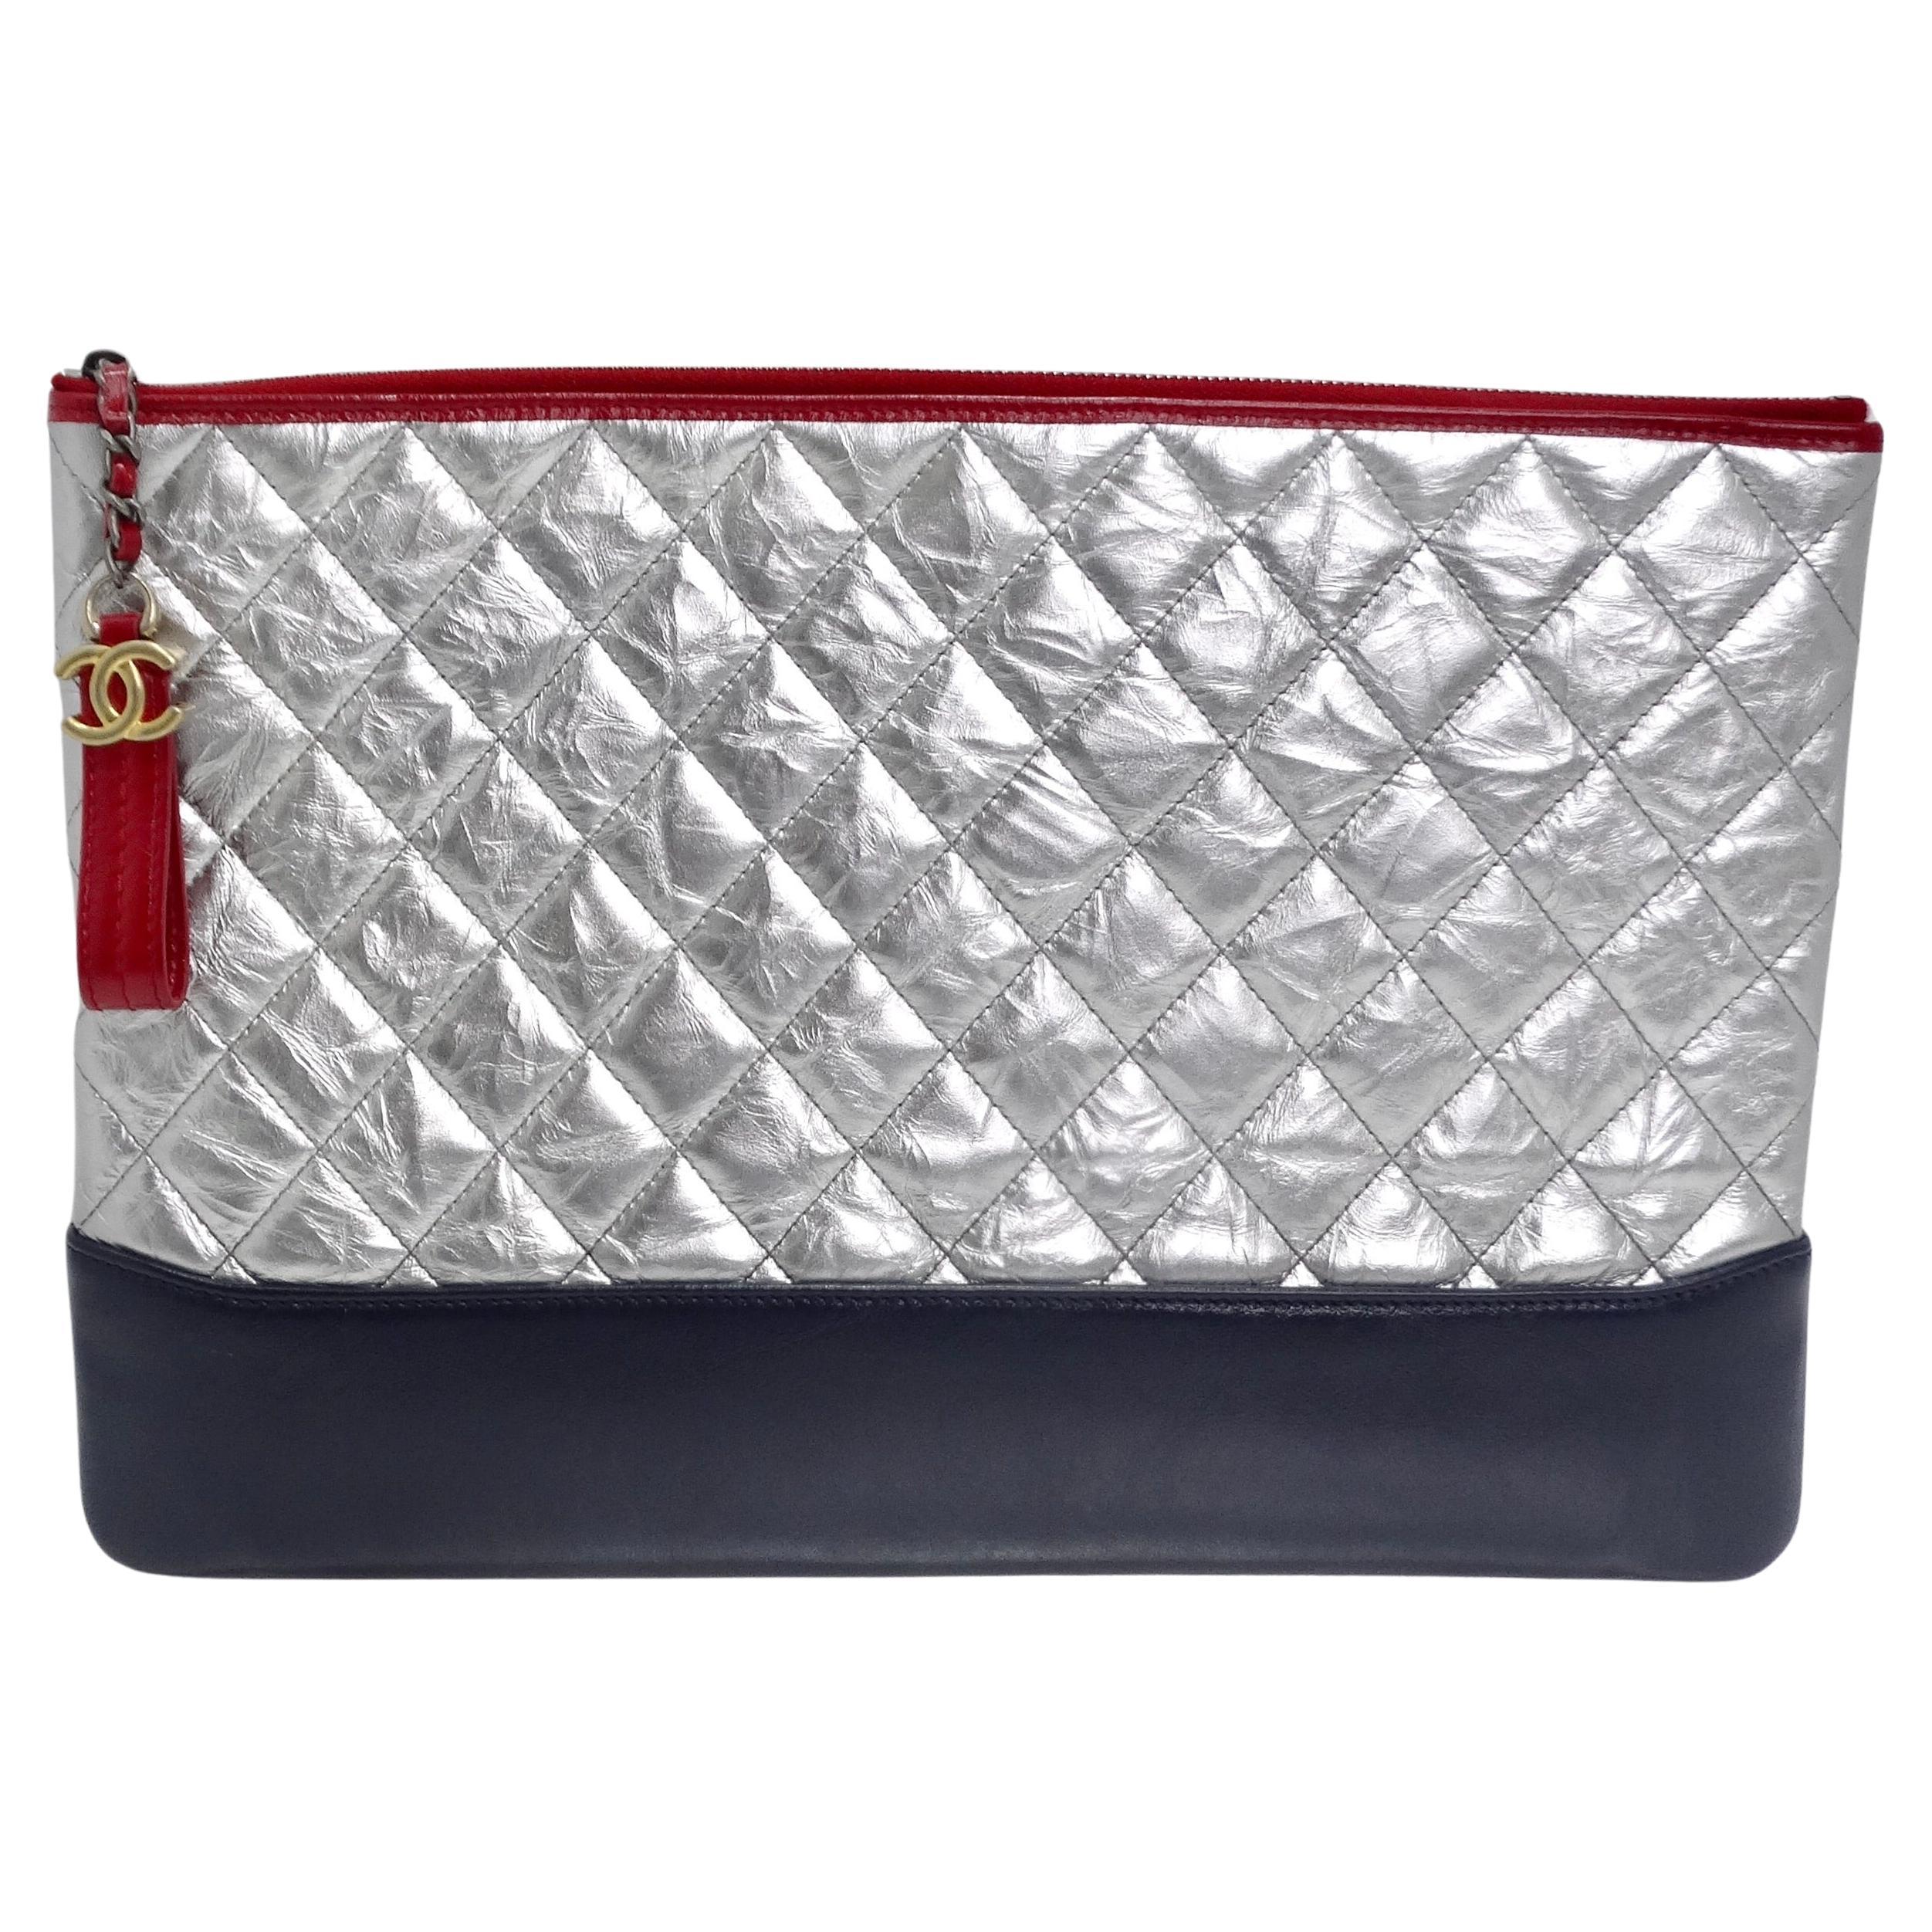 Chanel Silver Leather Gabrielle Clutch For Sale